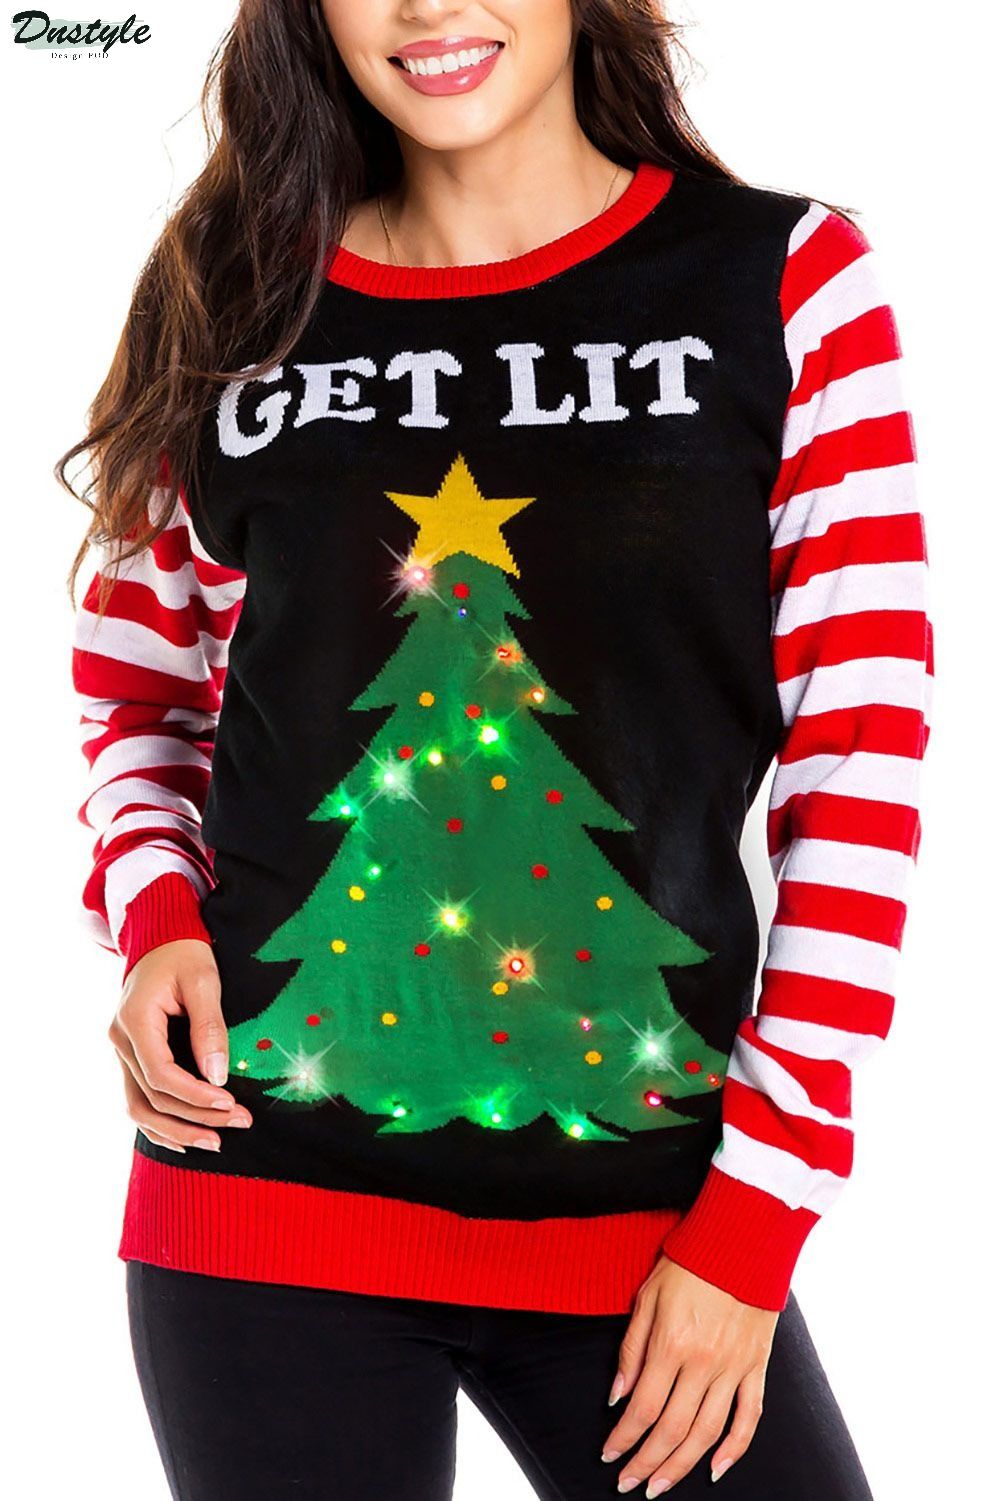 Get Lit Light Up Ugly Christmas Sweater